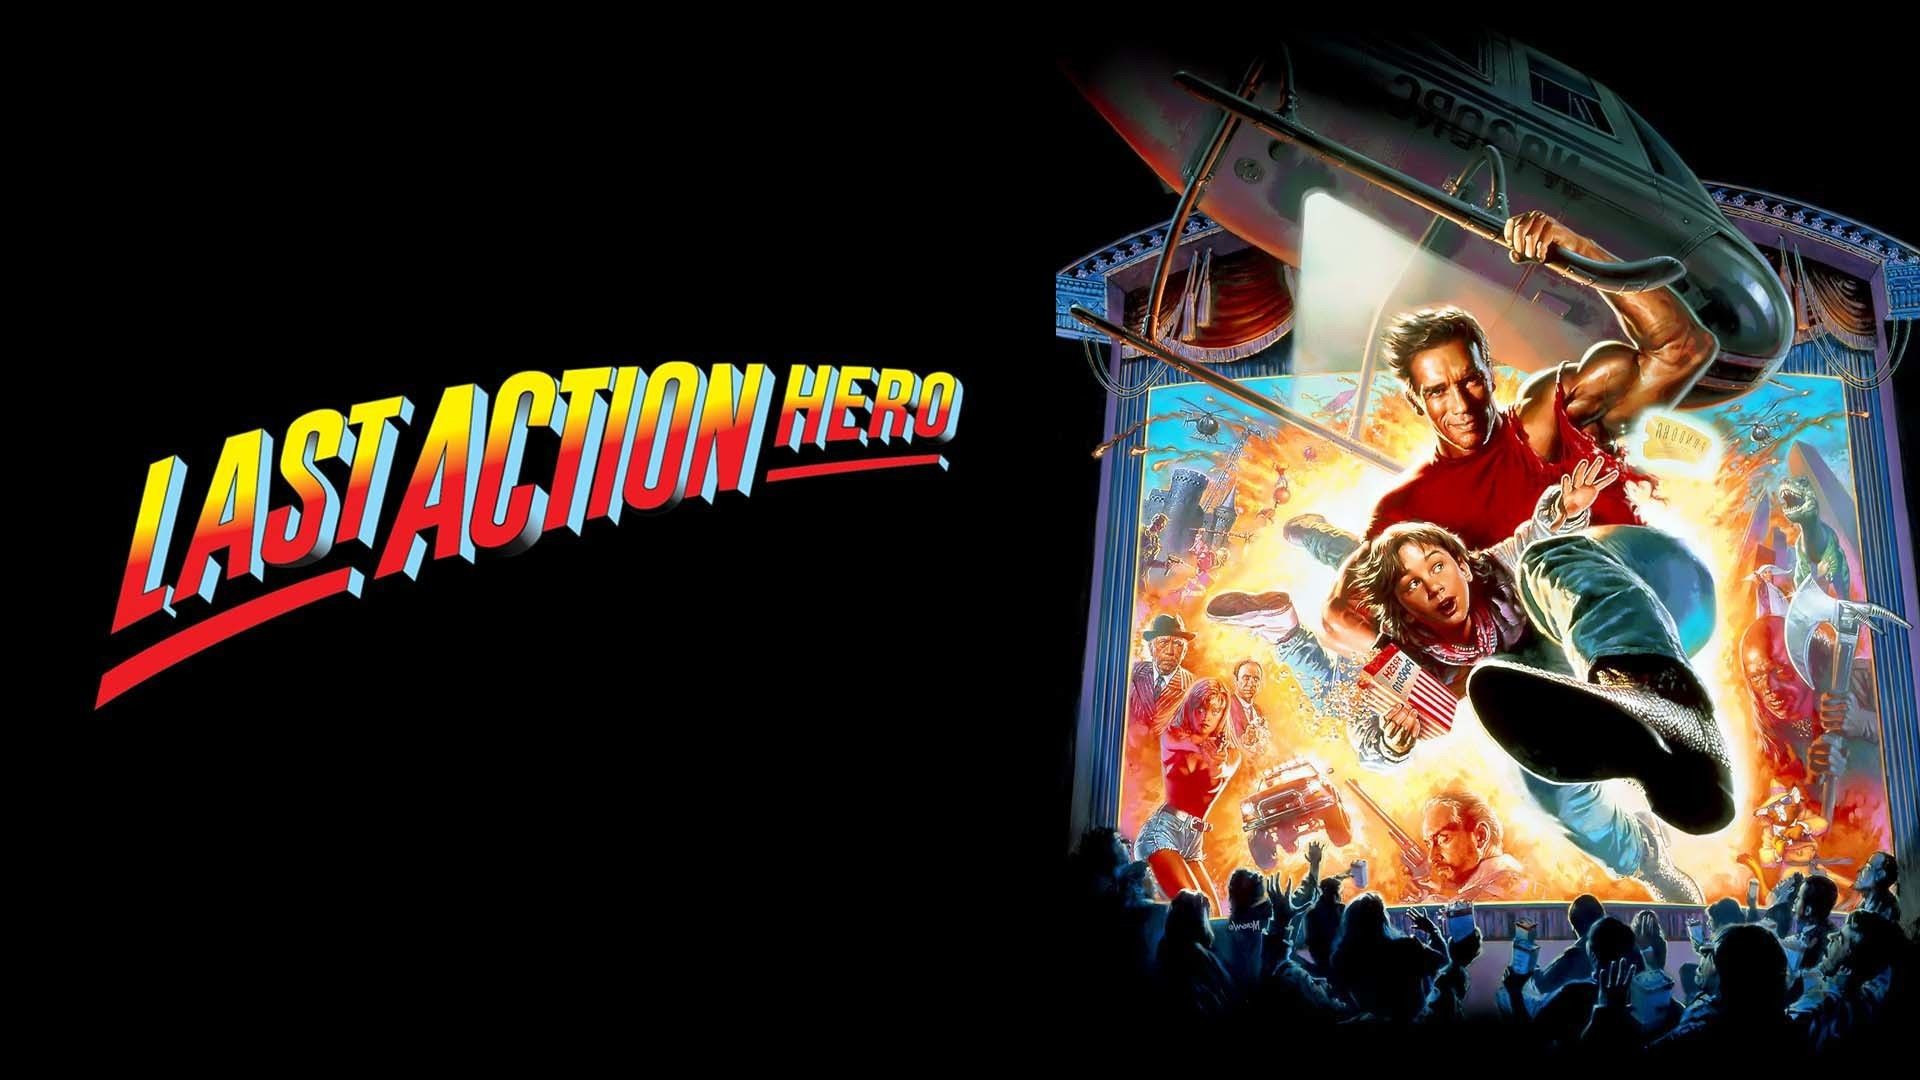 Last Action Hero 25th Anniversary: Fictional Franchise Fred Approves. We Live Entertainment